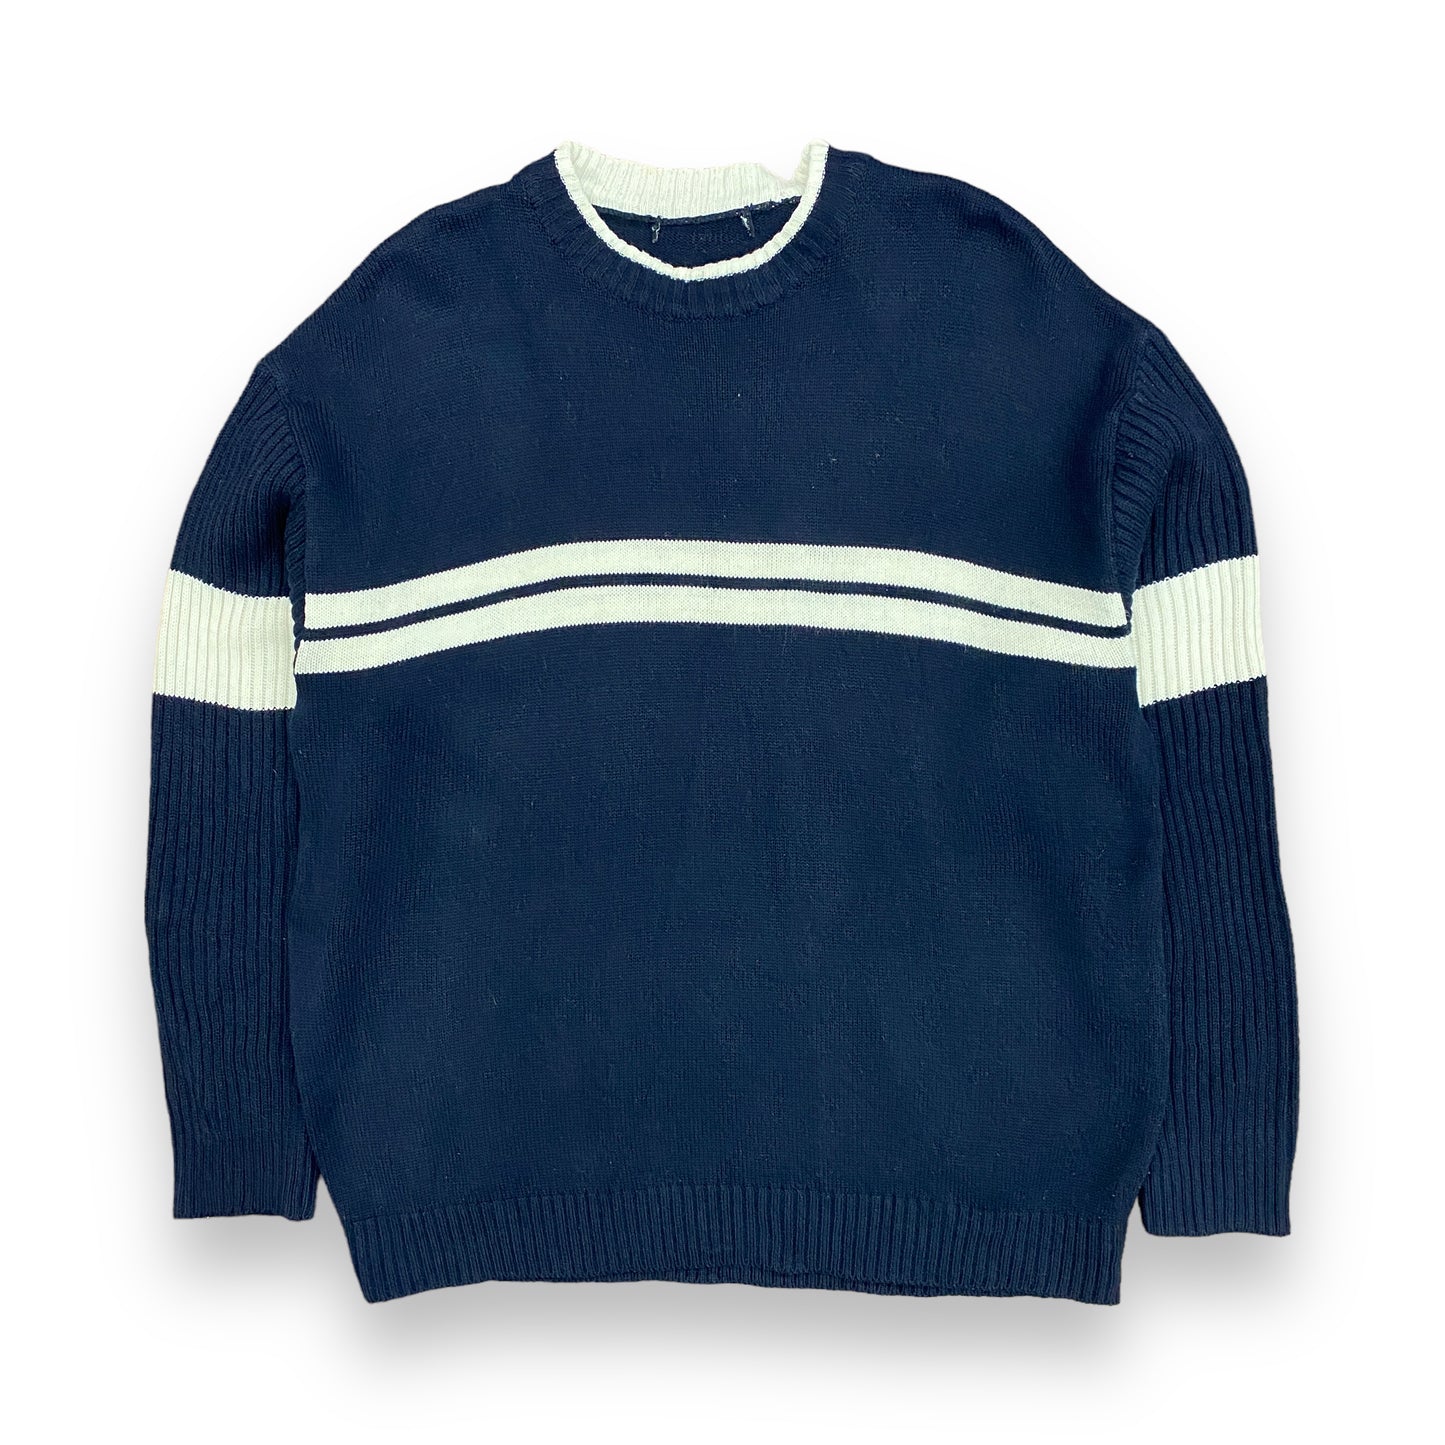 1990s Navy Blue Striped Sweater - Size Large